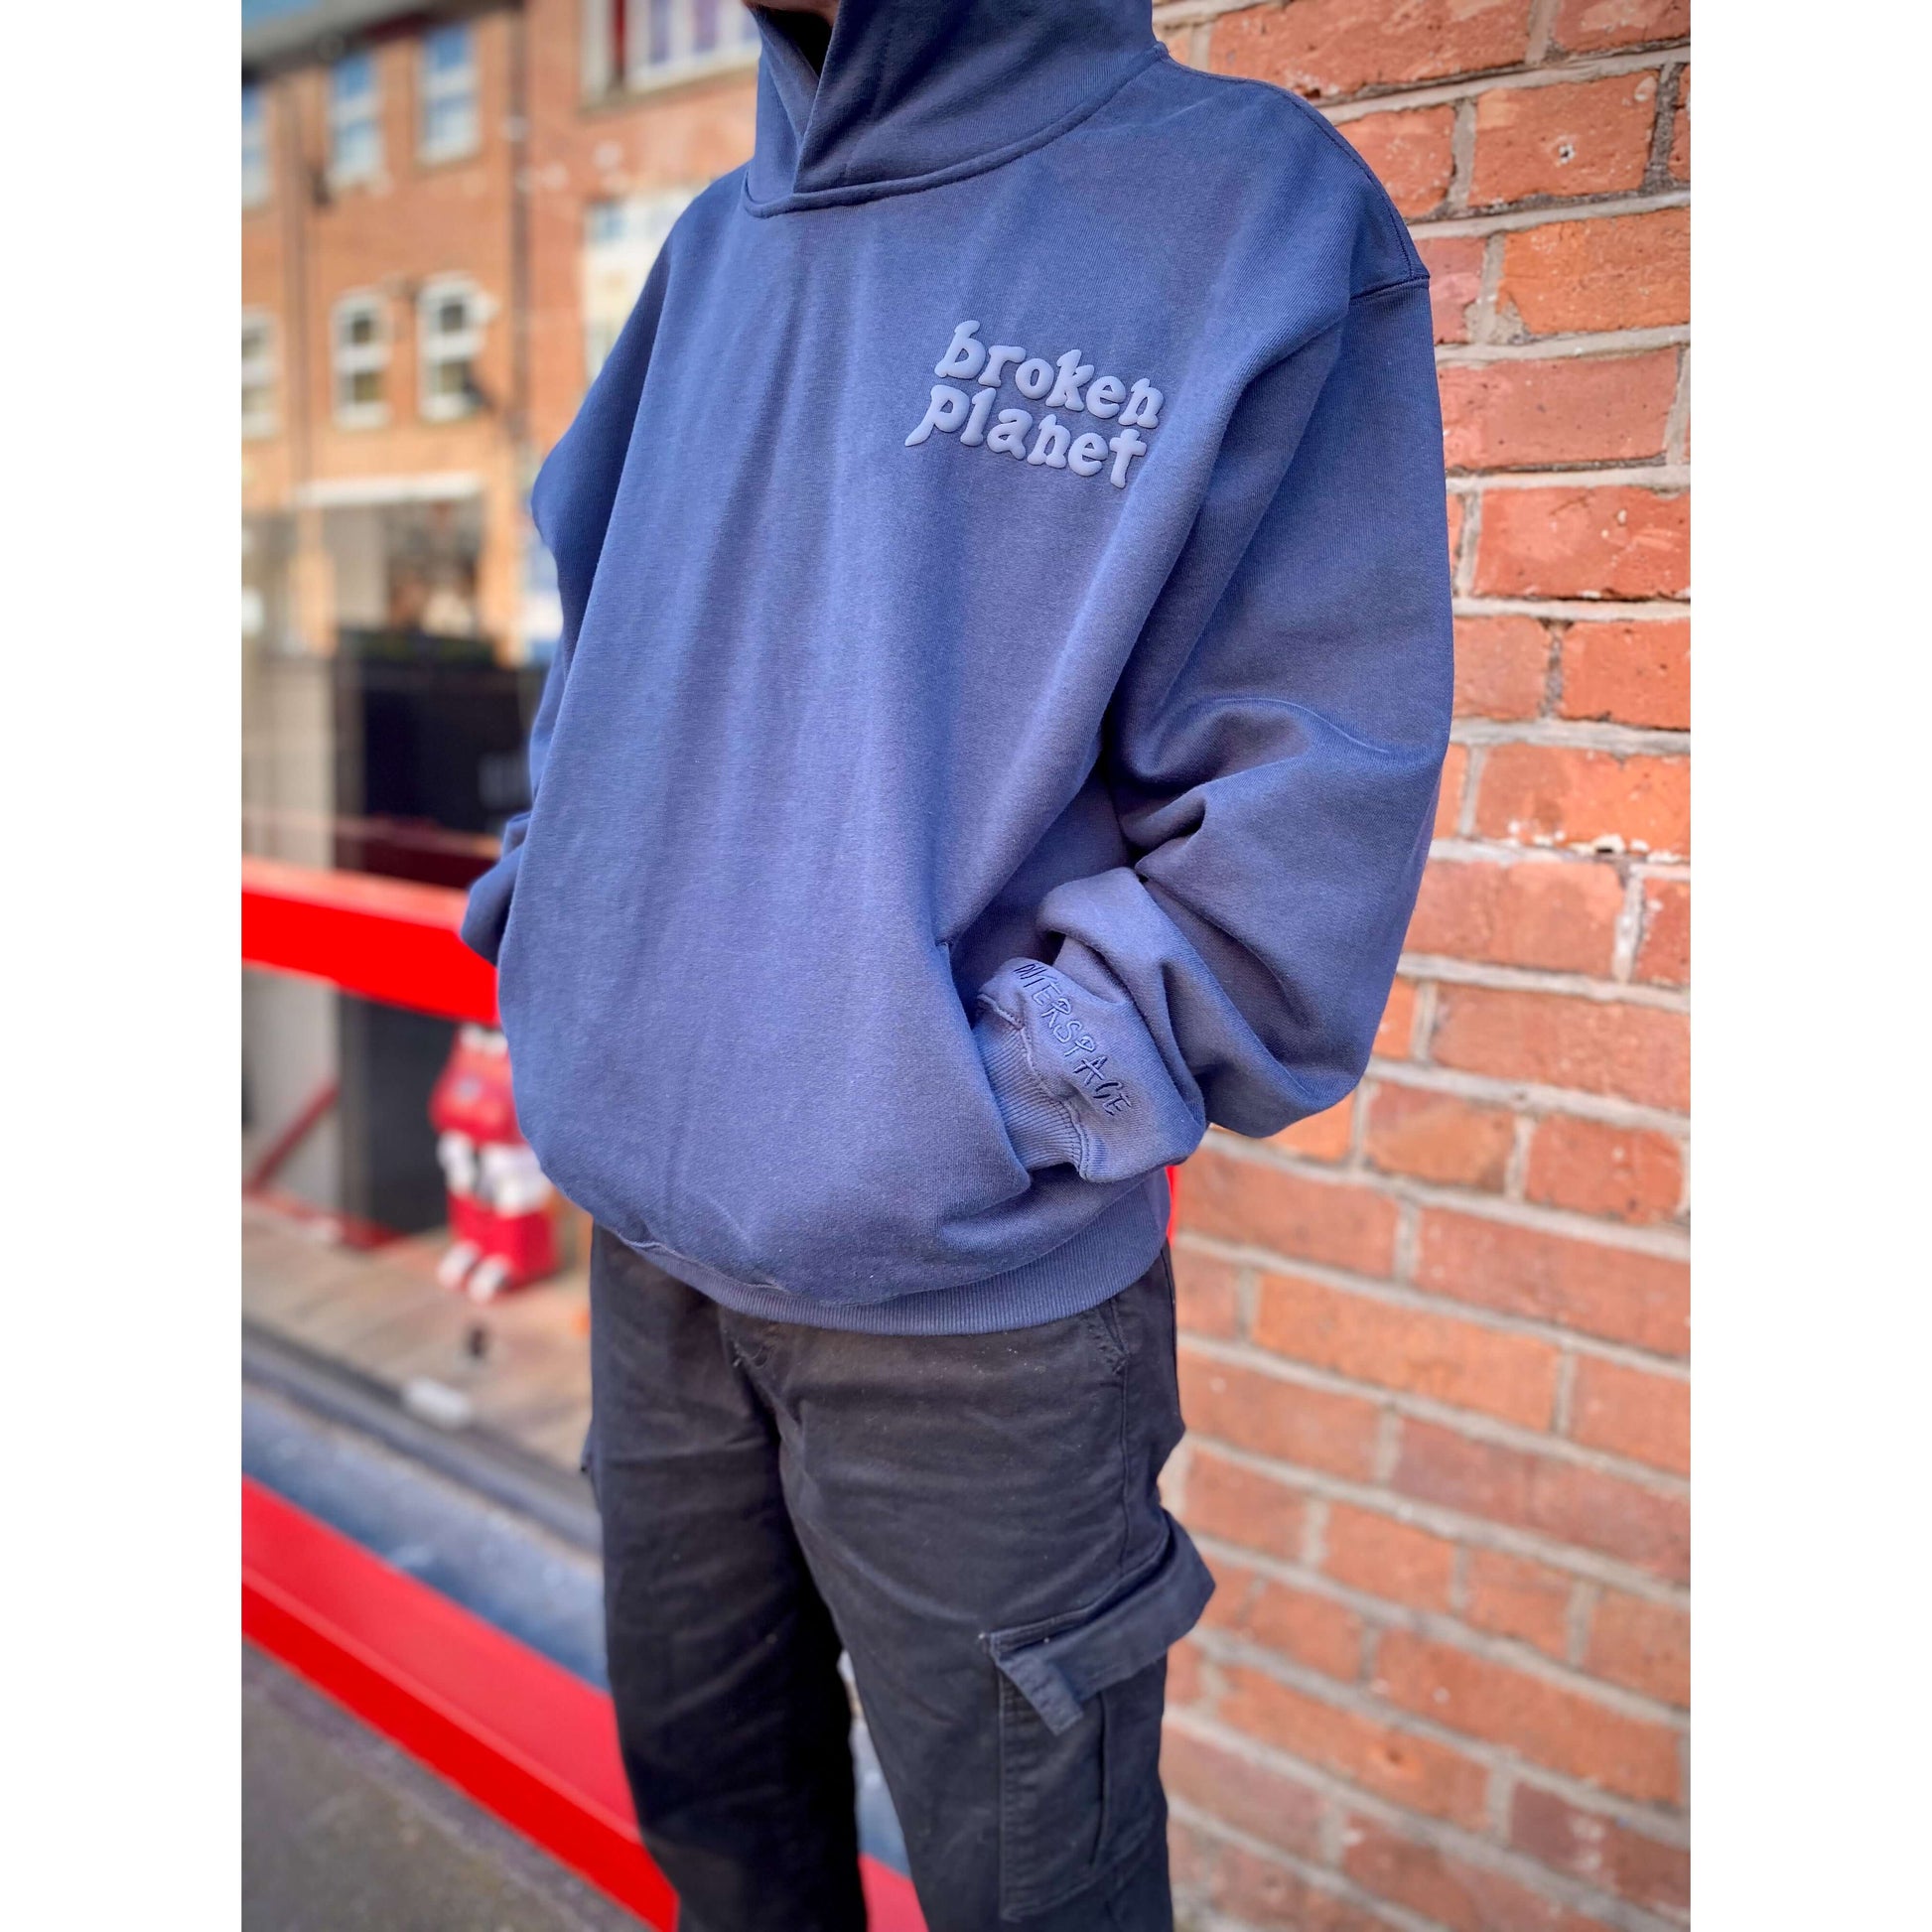 Broken Planet Market Basics Hoodie Outerspace Blue by Broken Planet Market from £140.00